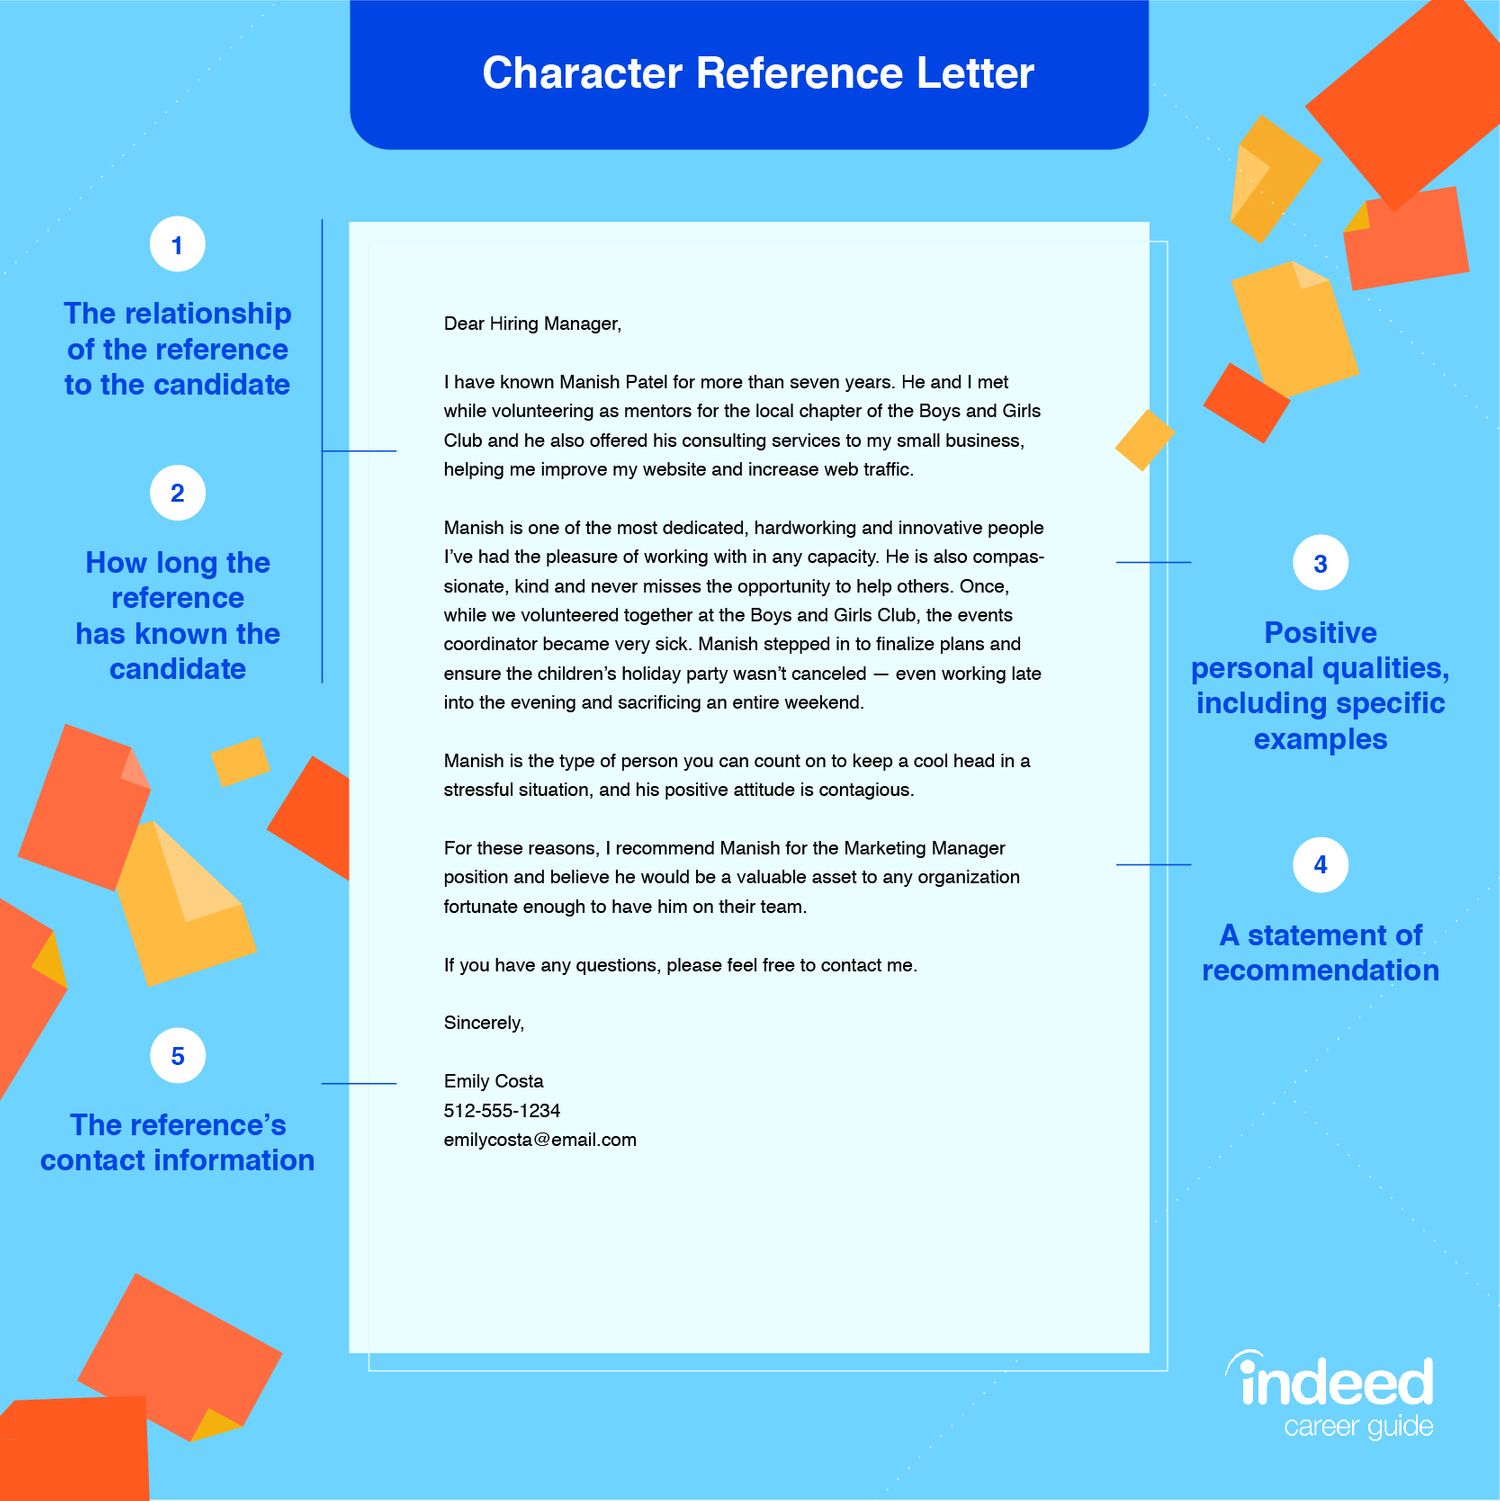 Character Reference Letter Format